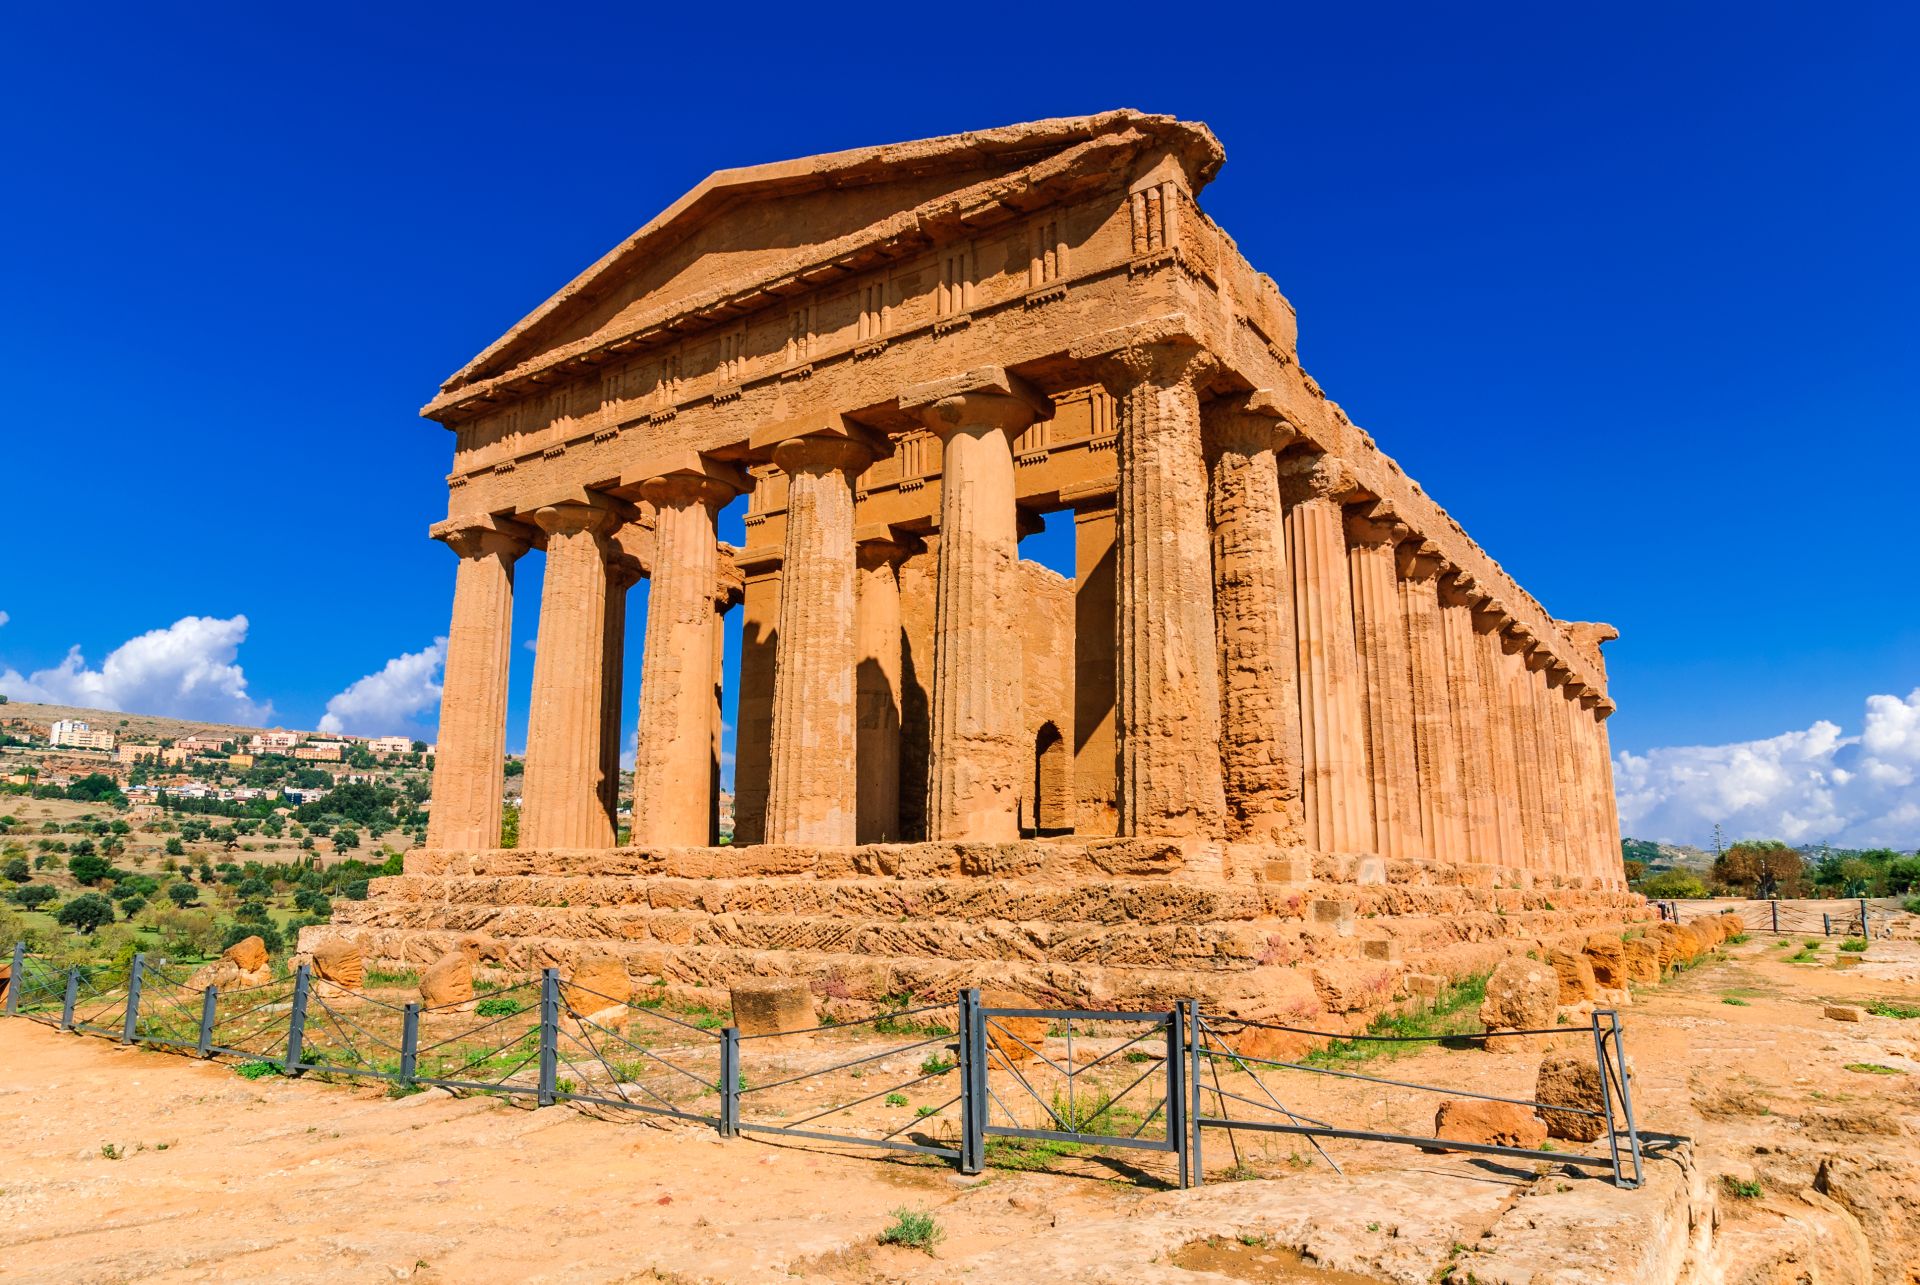 Sicily.-Temple-of-Concord-with-34-columns-one-of-the-best-preserved-greek-Doric-temples-in-the-world-Valle-dei-Tiempli-in-Agrigento-Italy